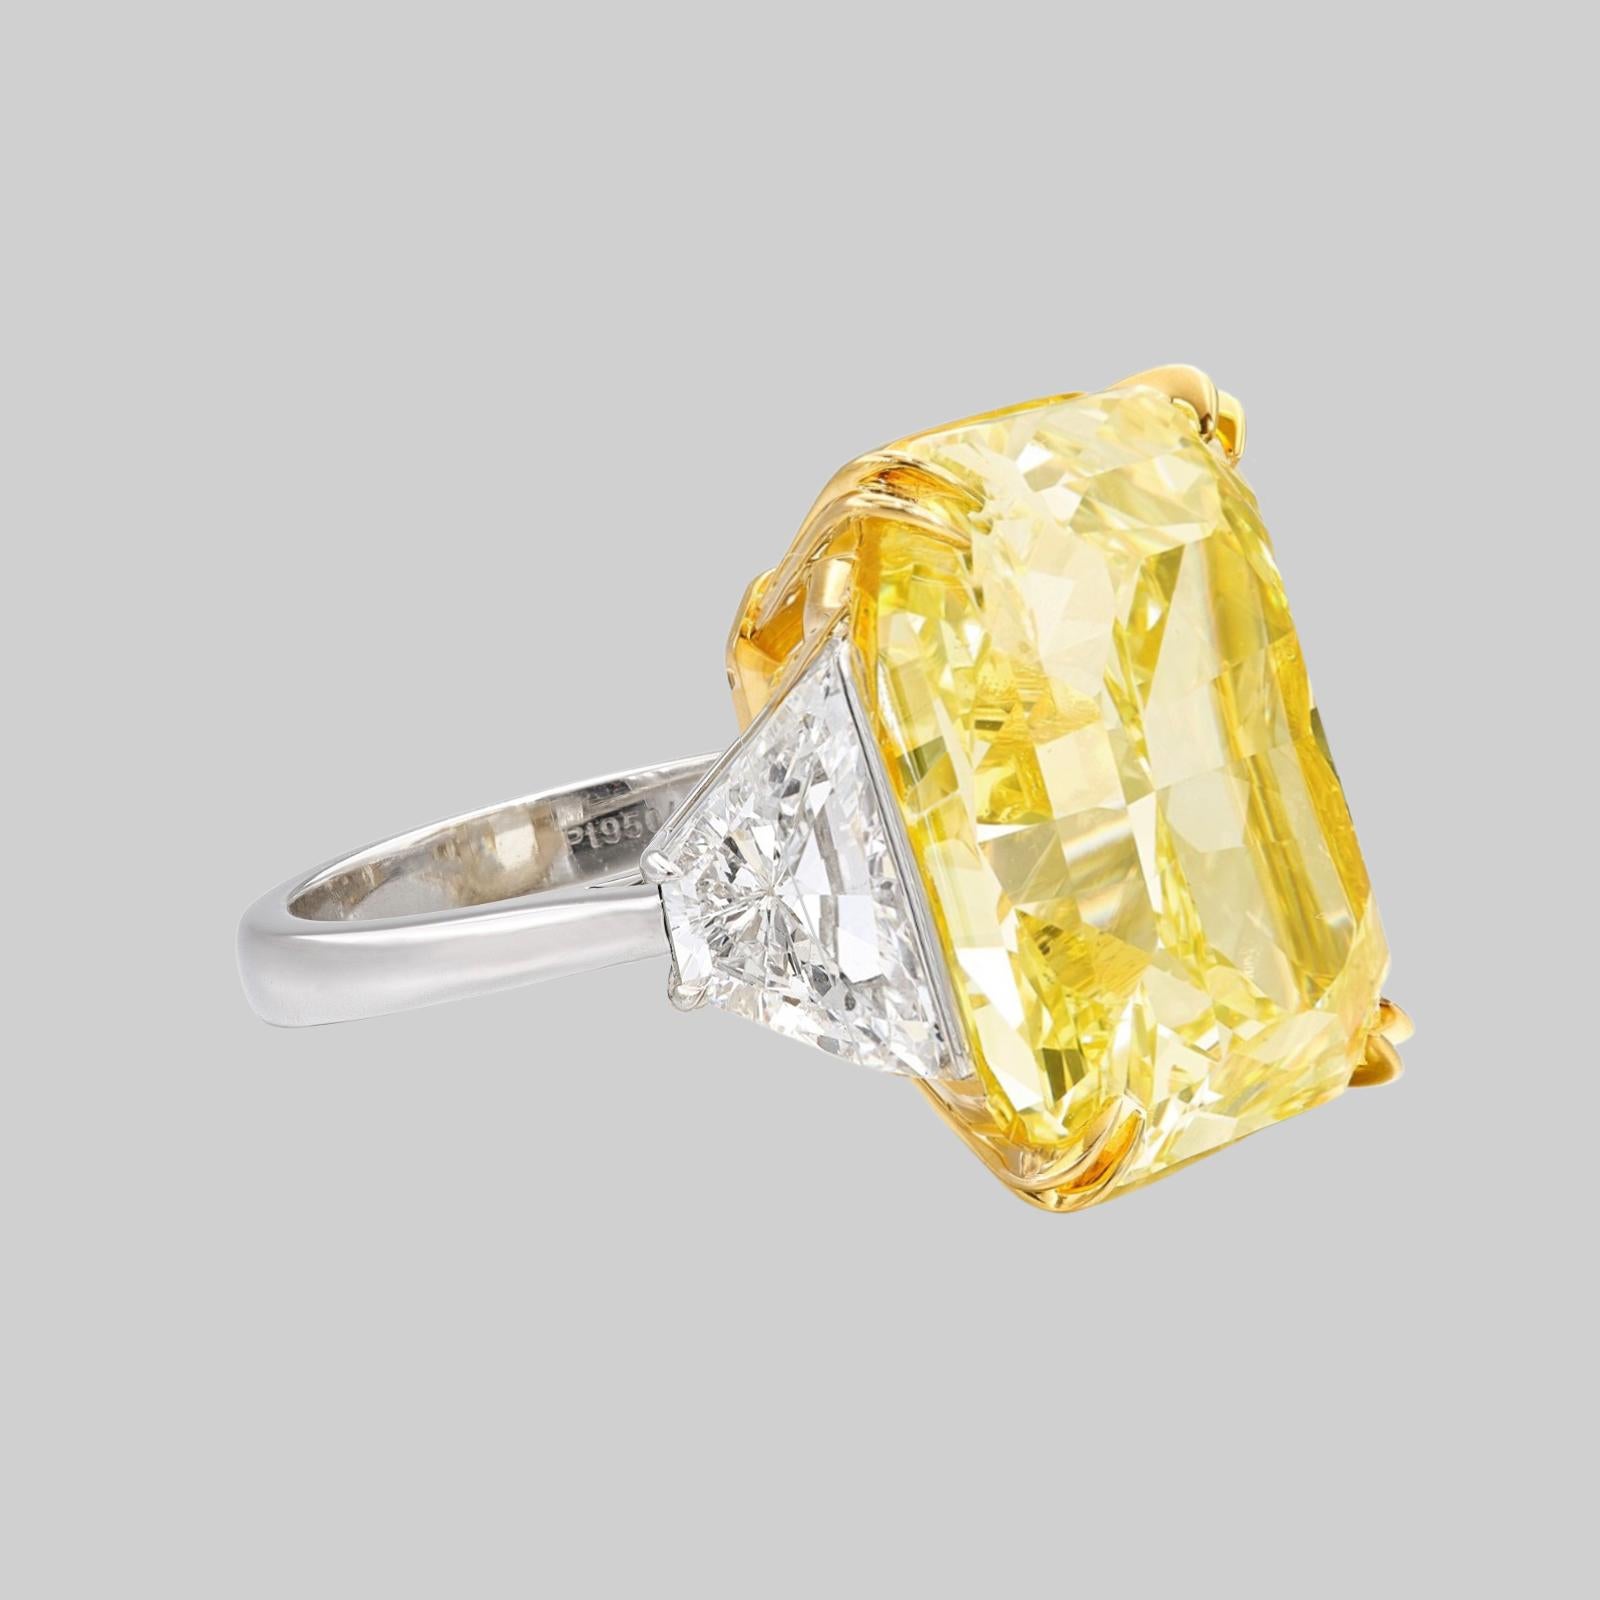 Radiant Cut EXCEPTIONAL GIA Certified 23 Carat Fancy VIVID Yellow Diamond Ring For Sale